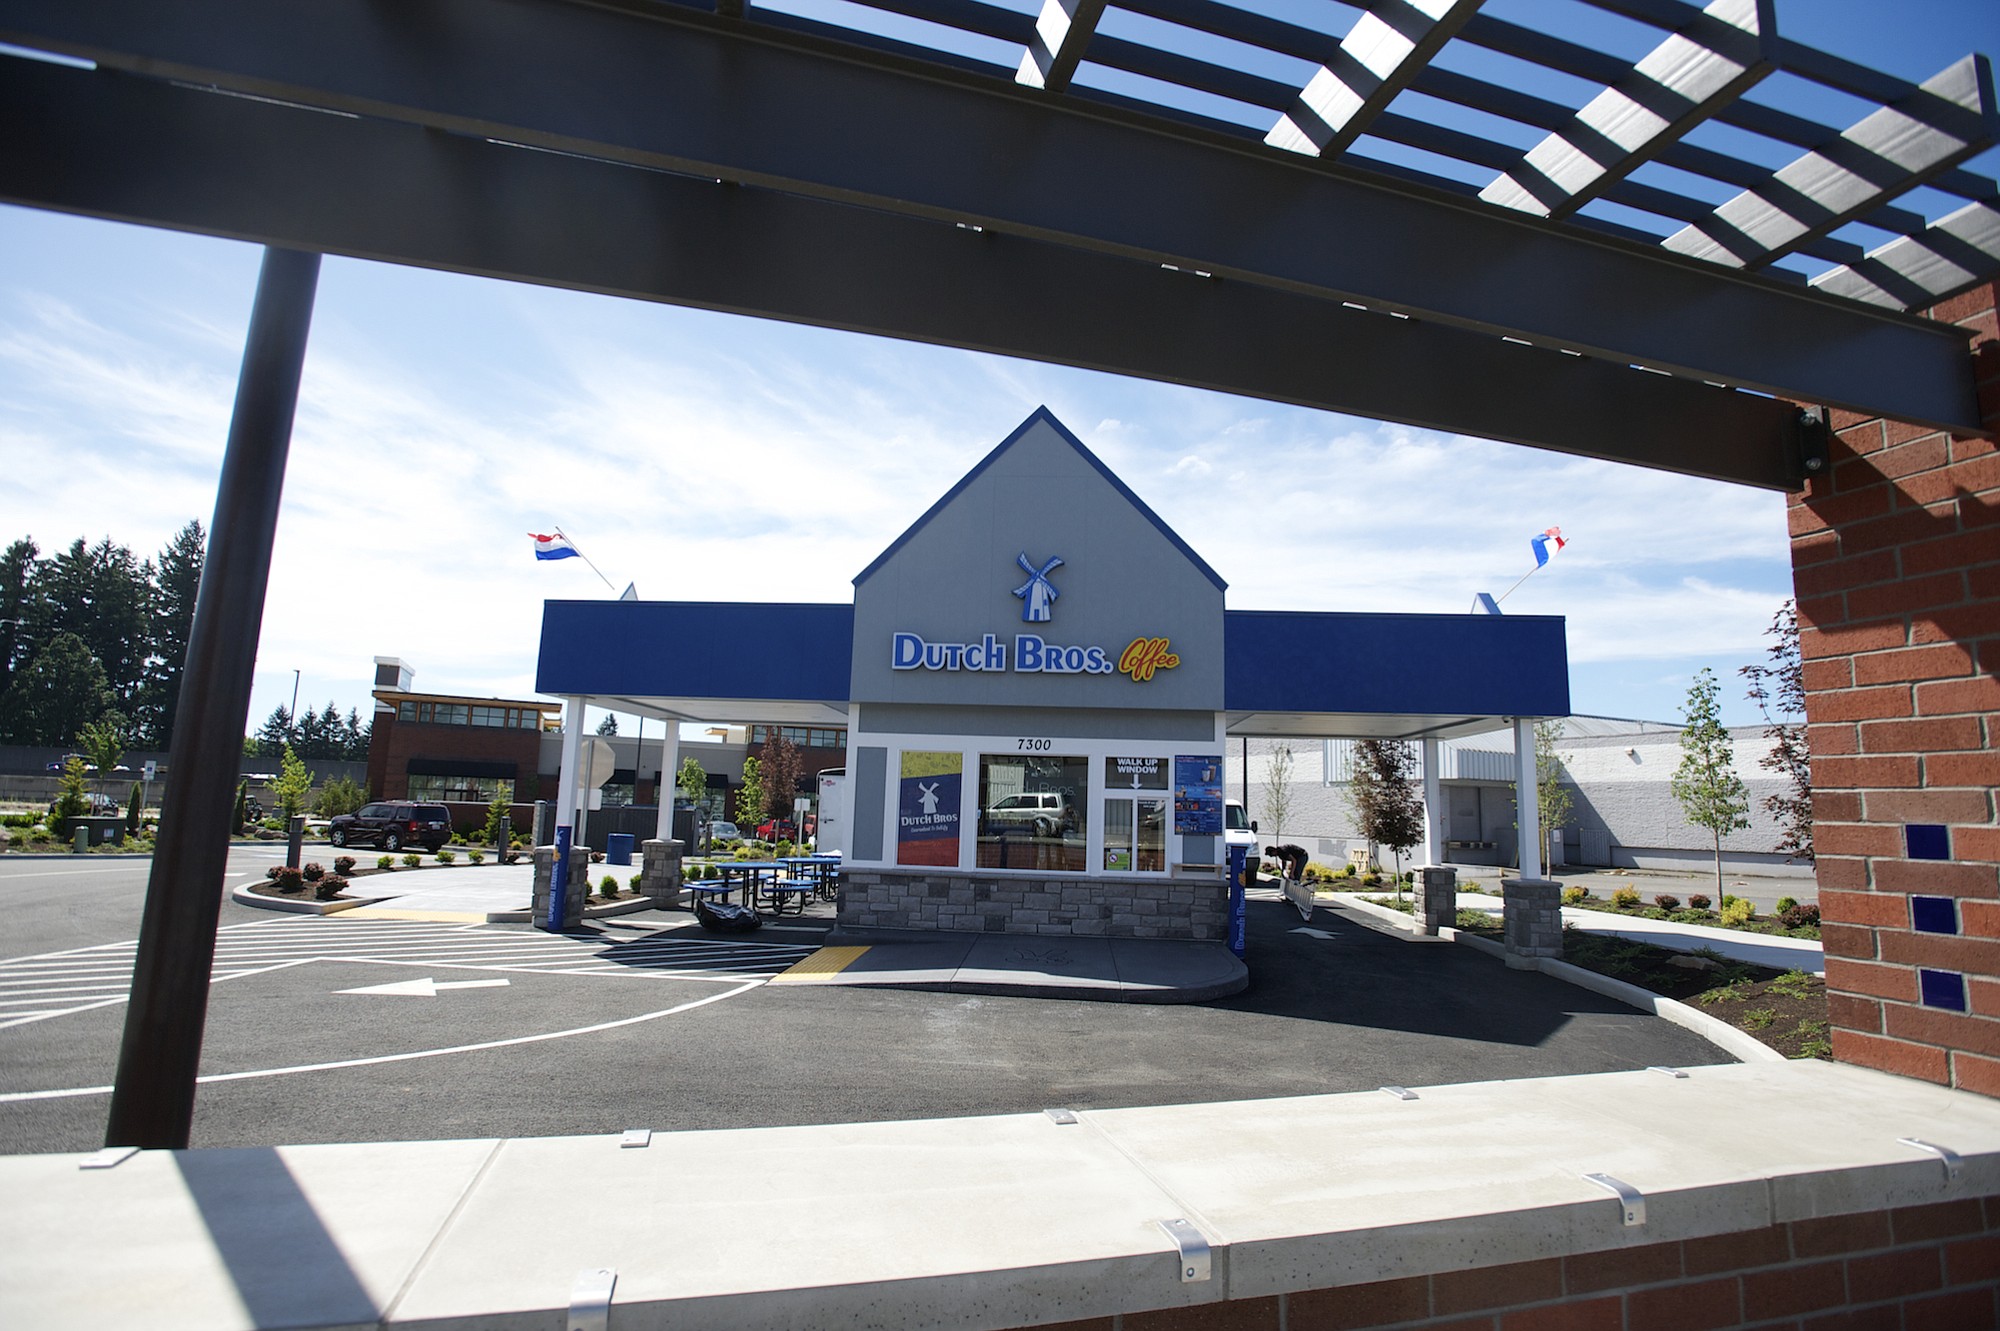 Photos by Steven Lane/The Columbian
Dutch Bros. Coffee will hold a grand opening celebration today for this kiosk at 7300 N.E. Highway 99, with specials on drinks.